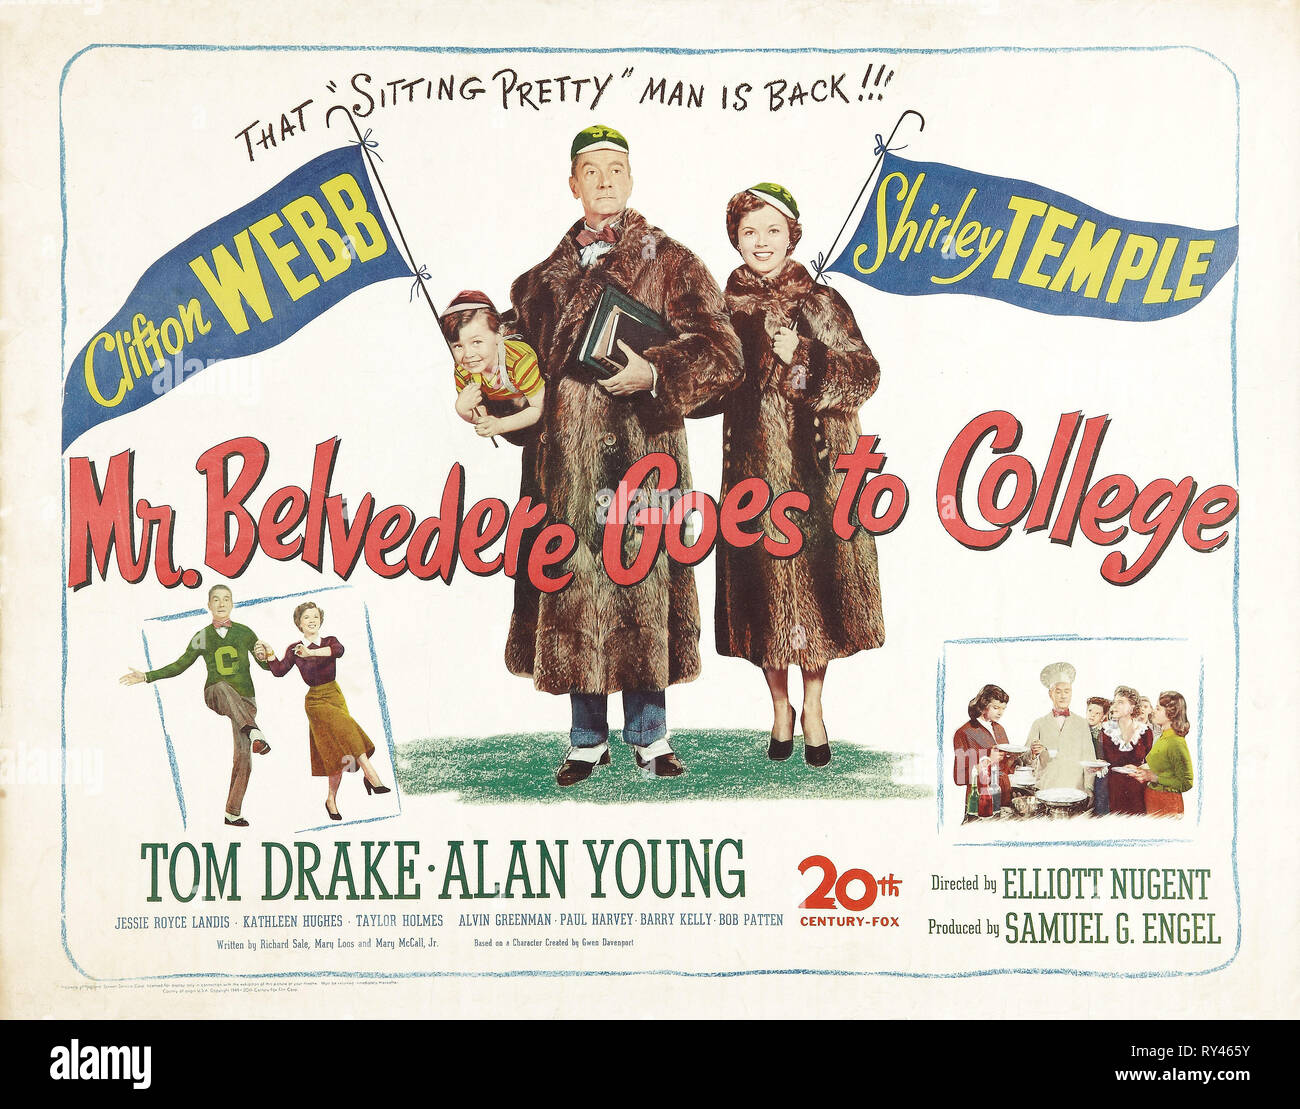 MOVIE POSTER, MR. BELVEDERE GOES TO COLLEGE, 1949 Stock Photo